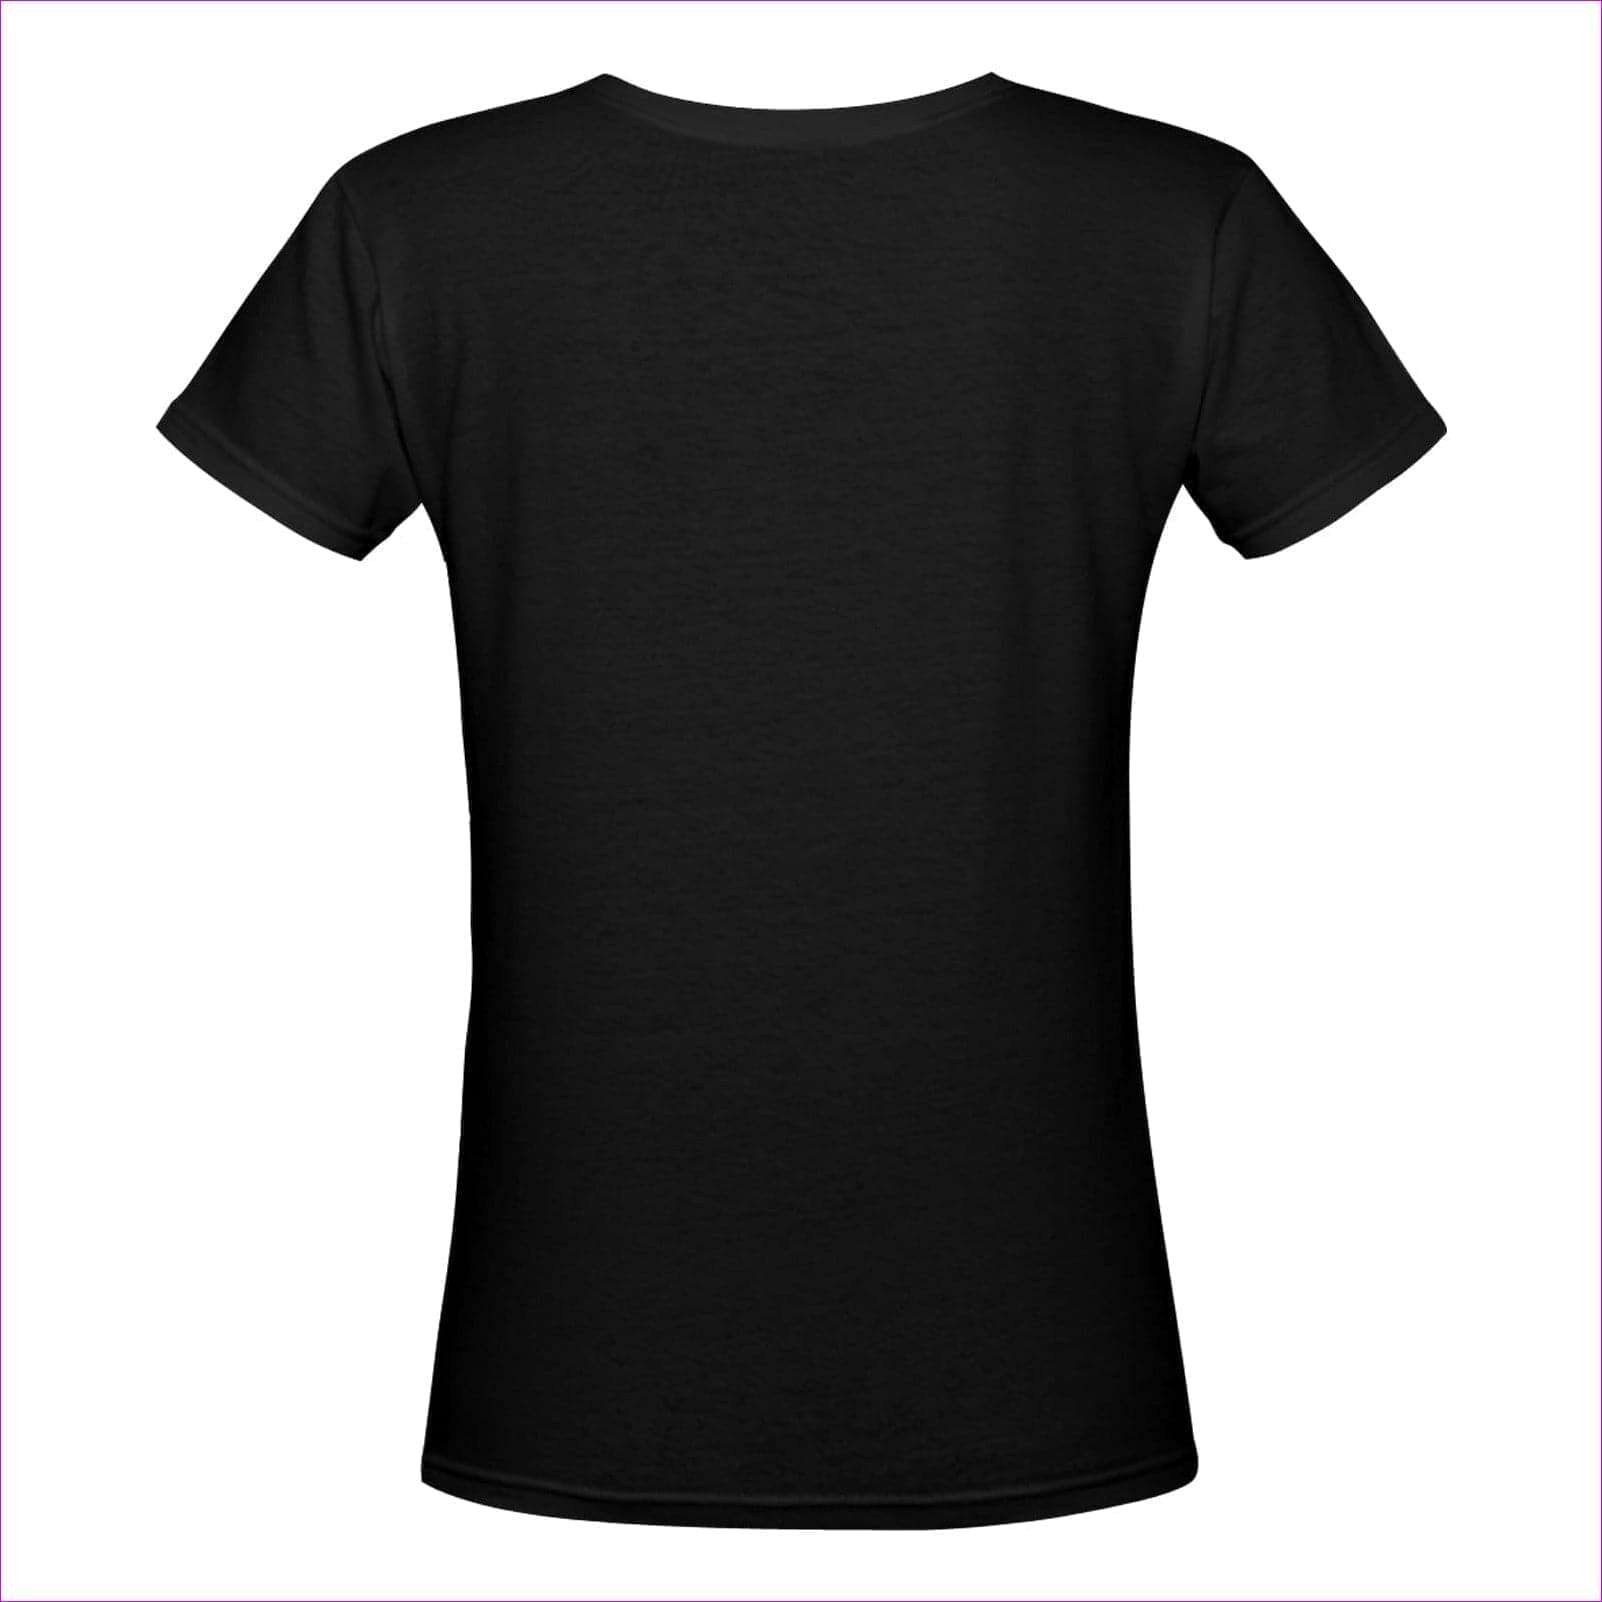 - "I Know You See It" V-Neck Womens T-Shirt - Womens T-Shirts at TFC&H Co.